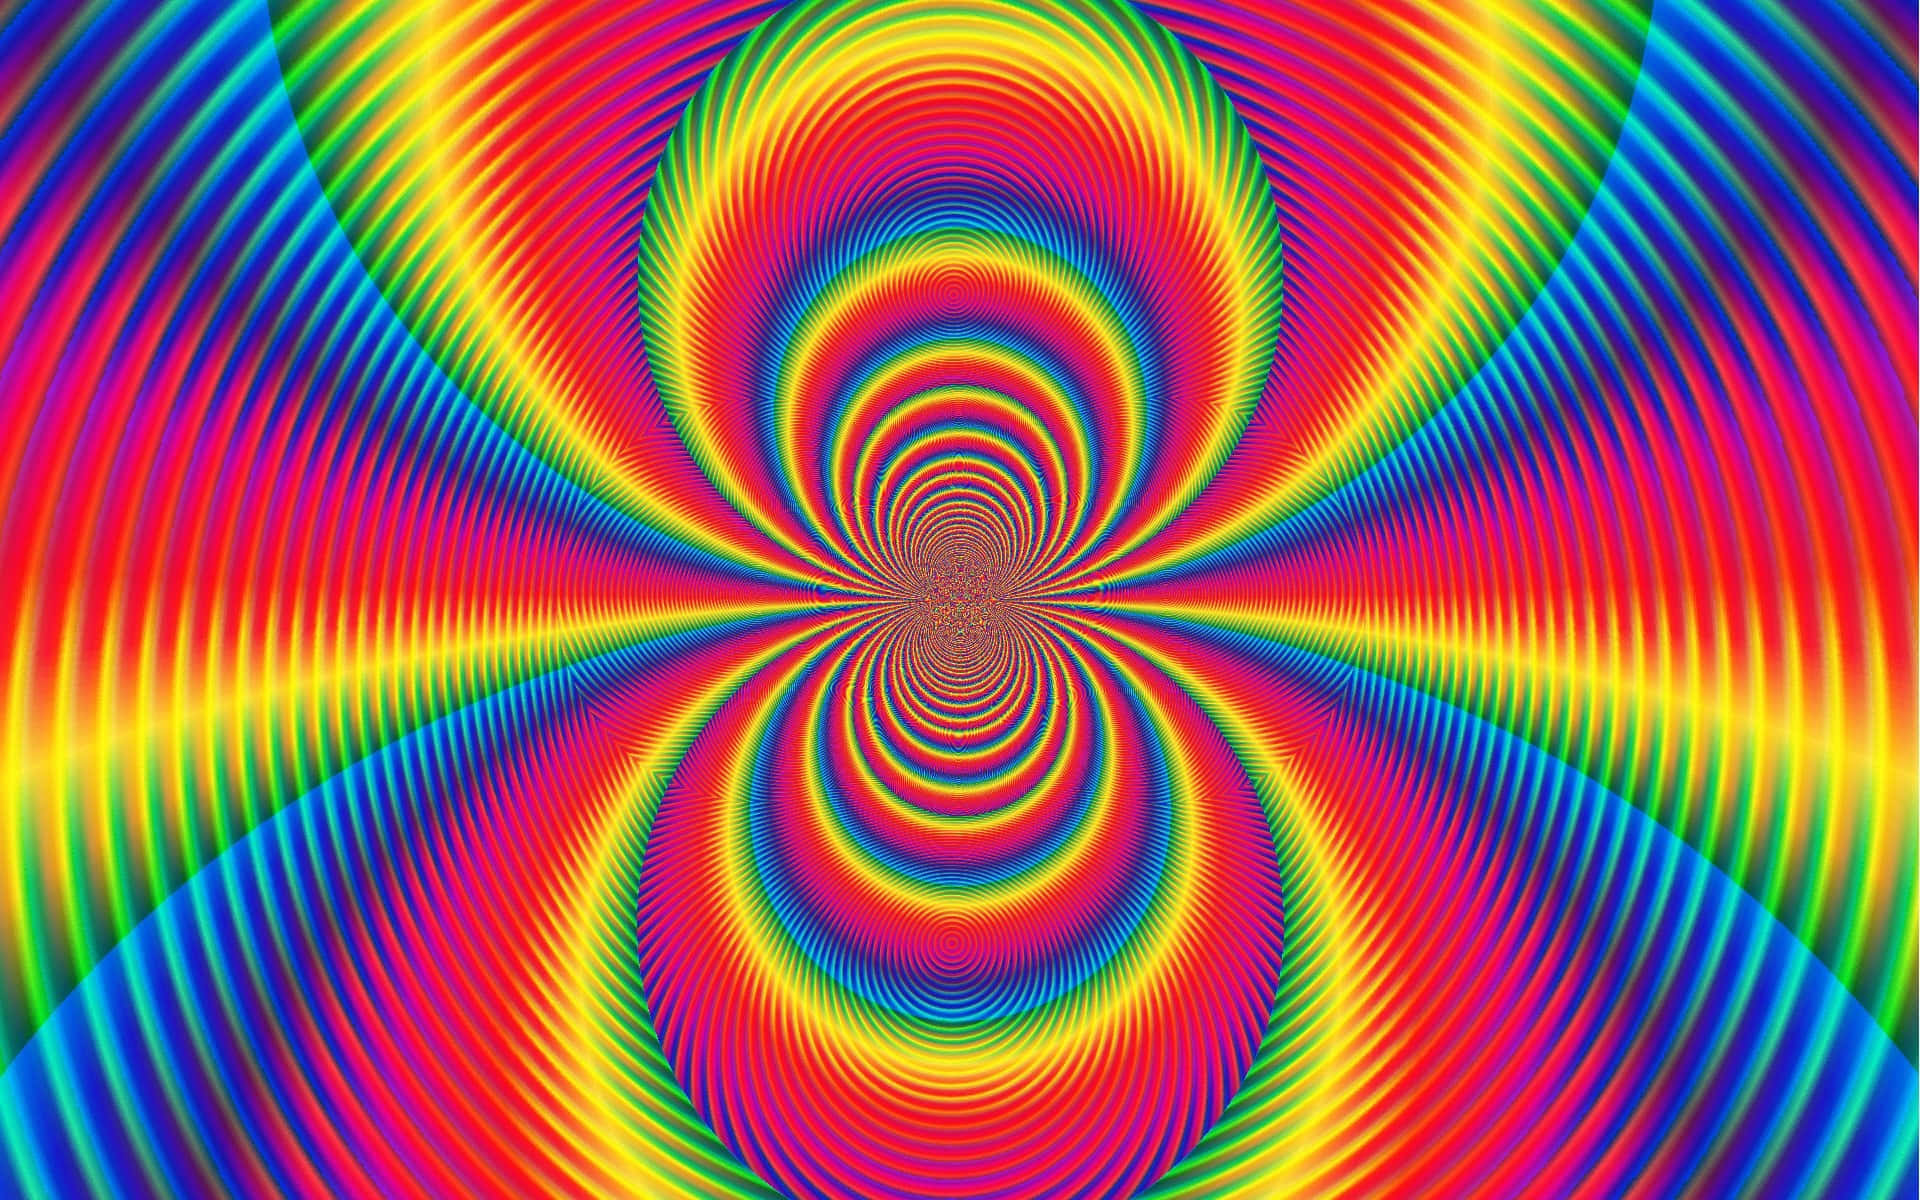 a colorful psychedelic pattern with a spiral design